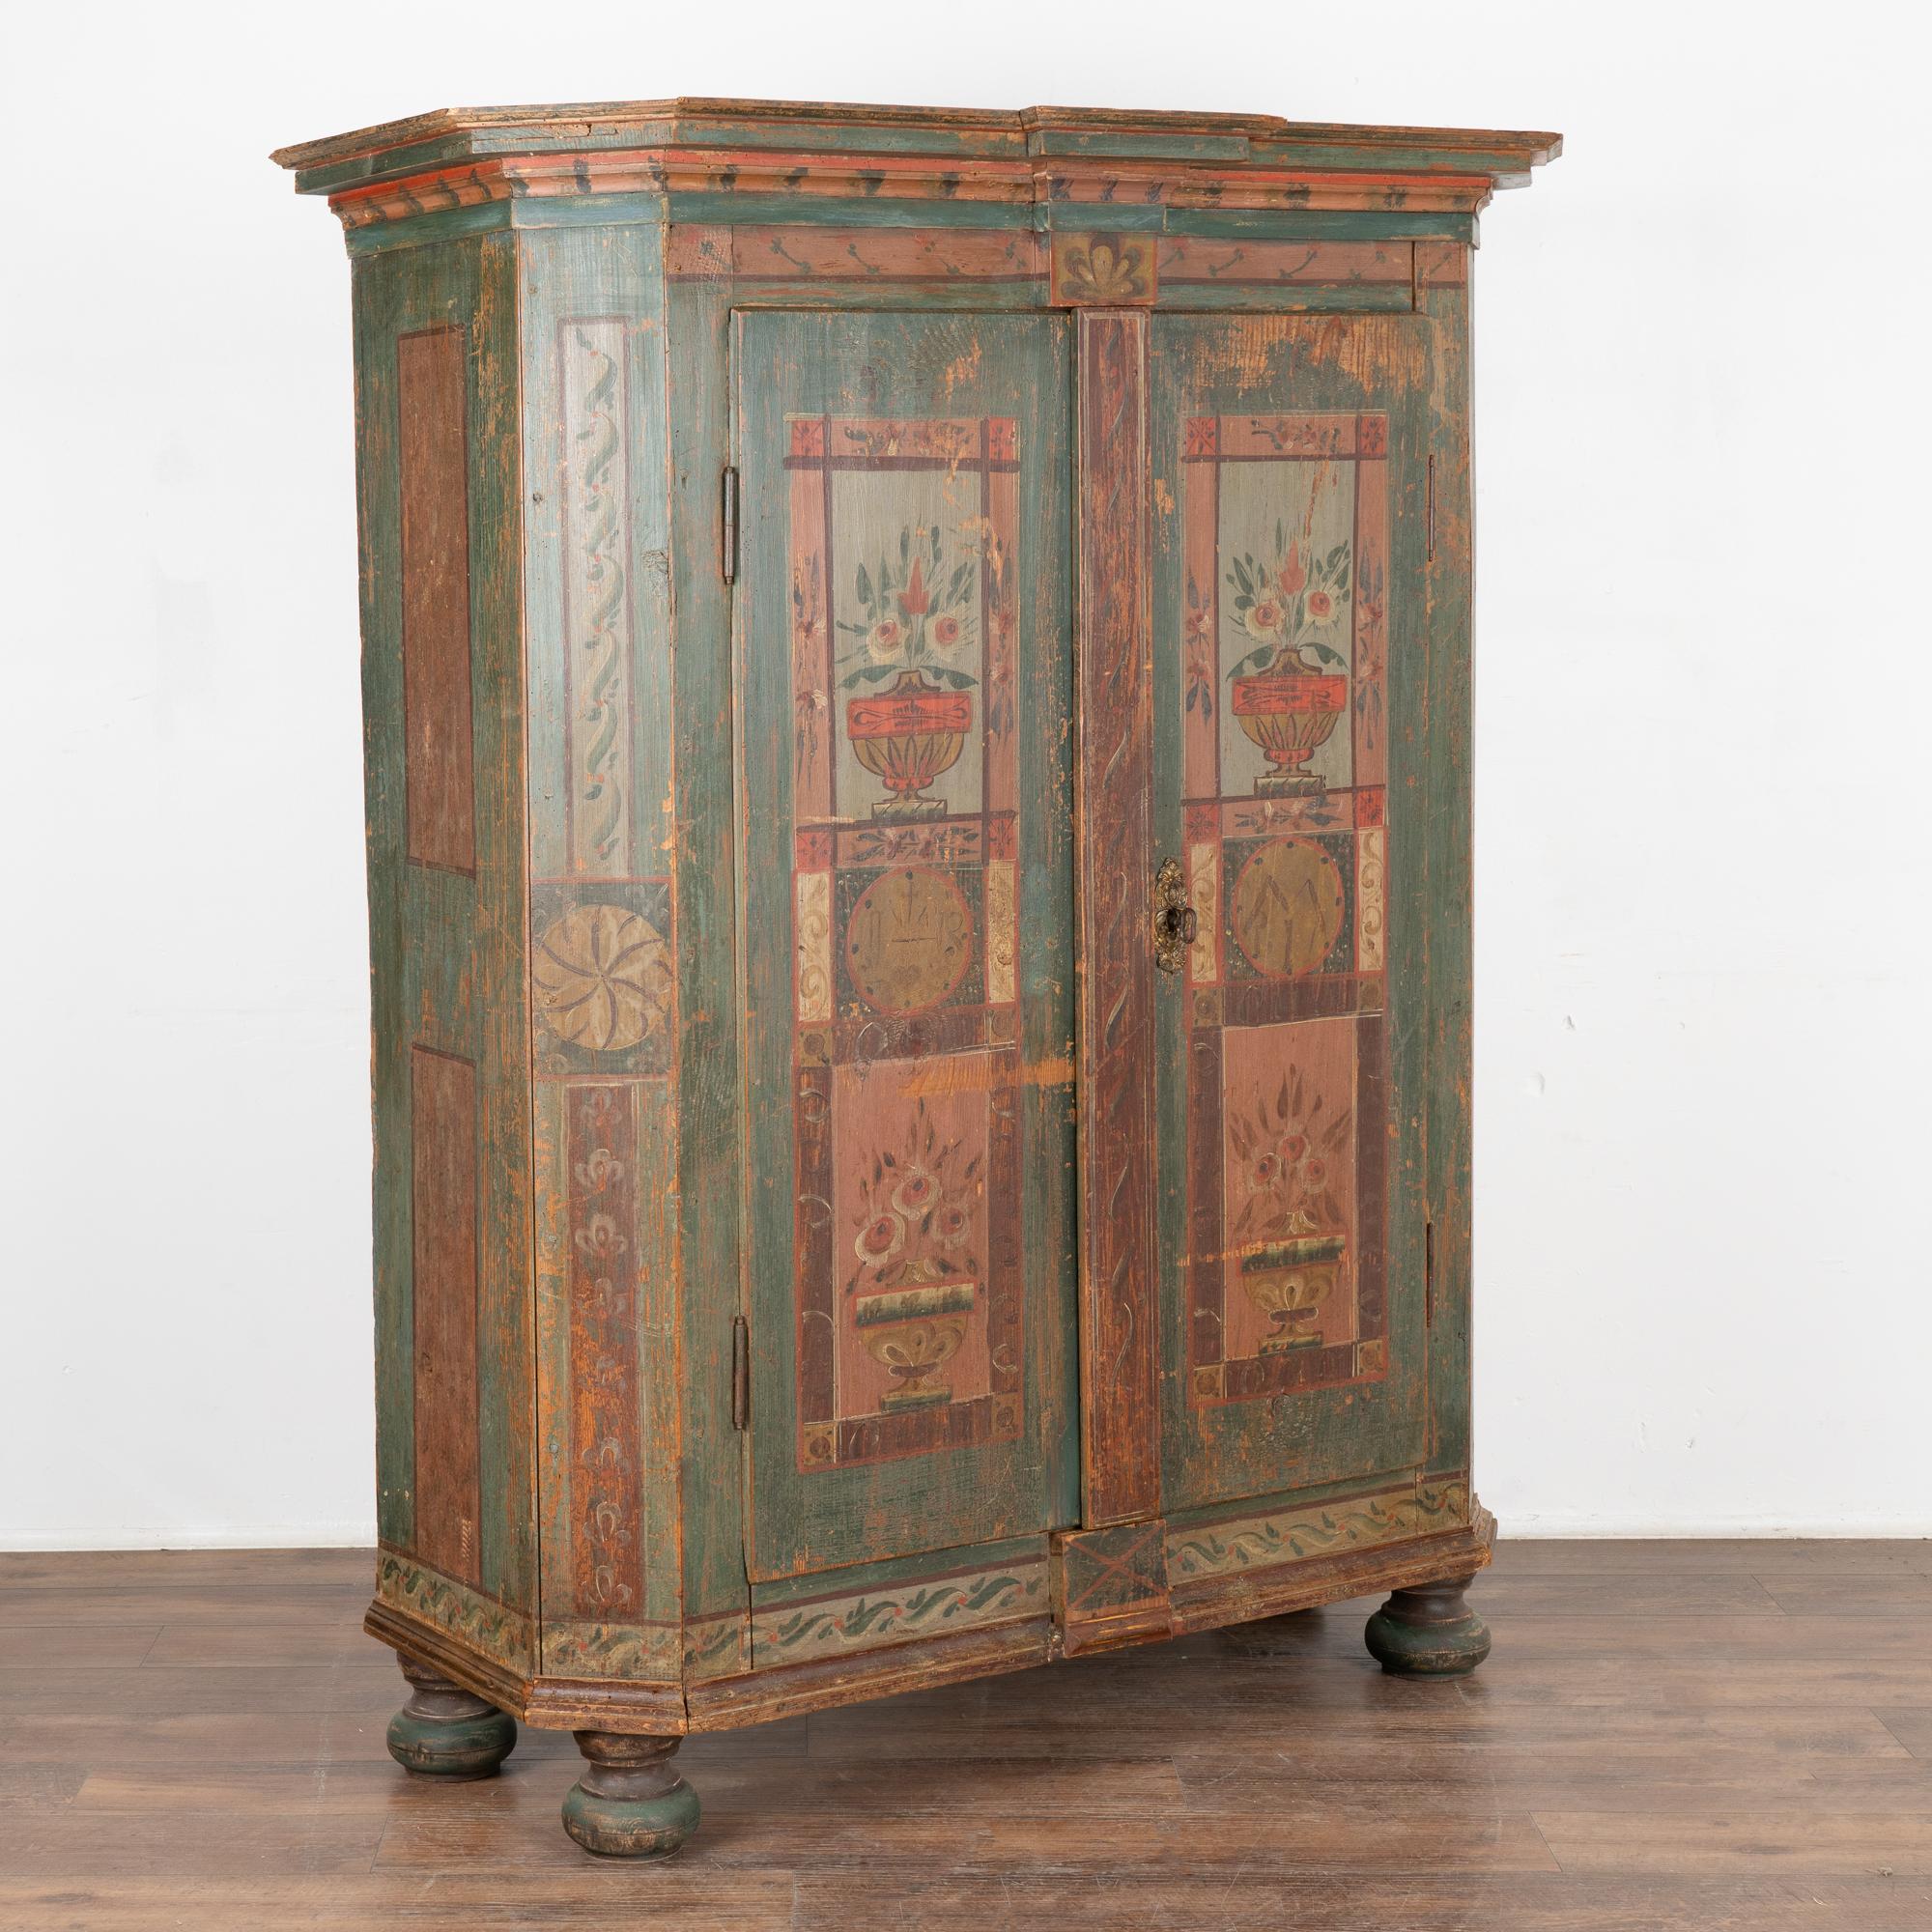 This painted pine armoire still maintains the quality and details of the original hand-painted finish. The floral and geometric patterns against the green painted background were traditional folk art style elements of the era.
This armoire was